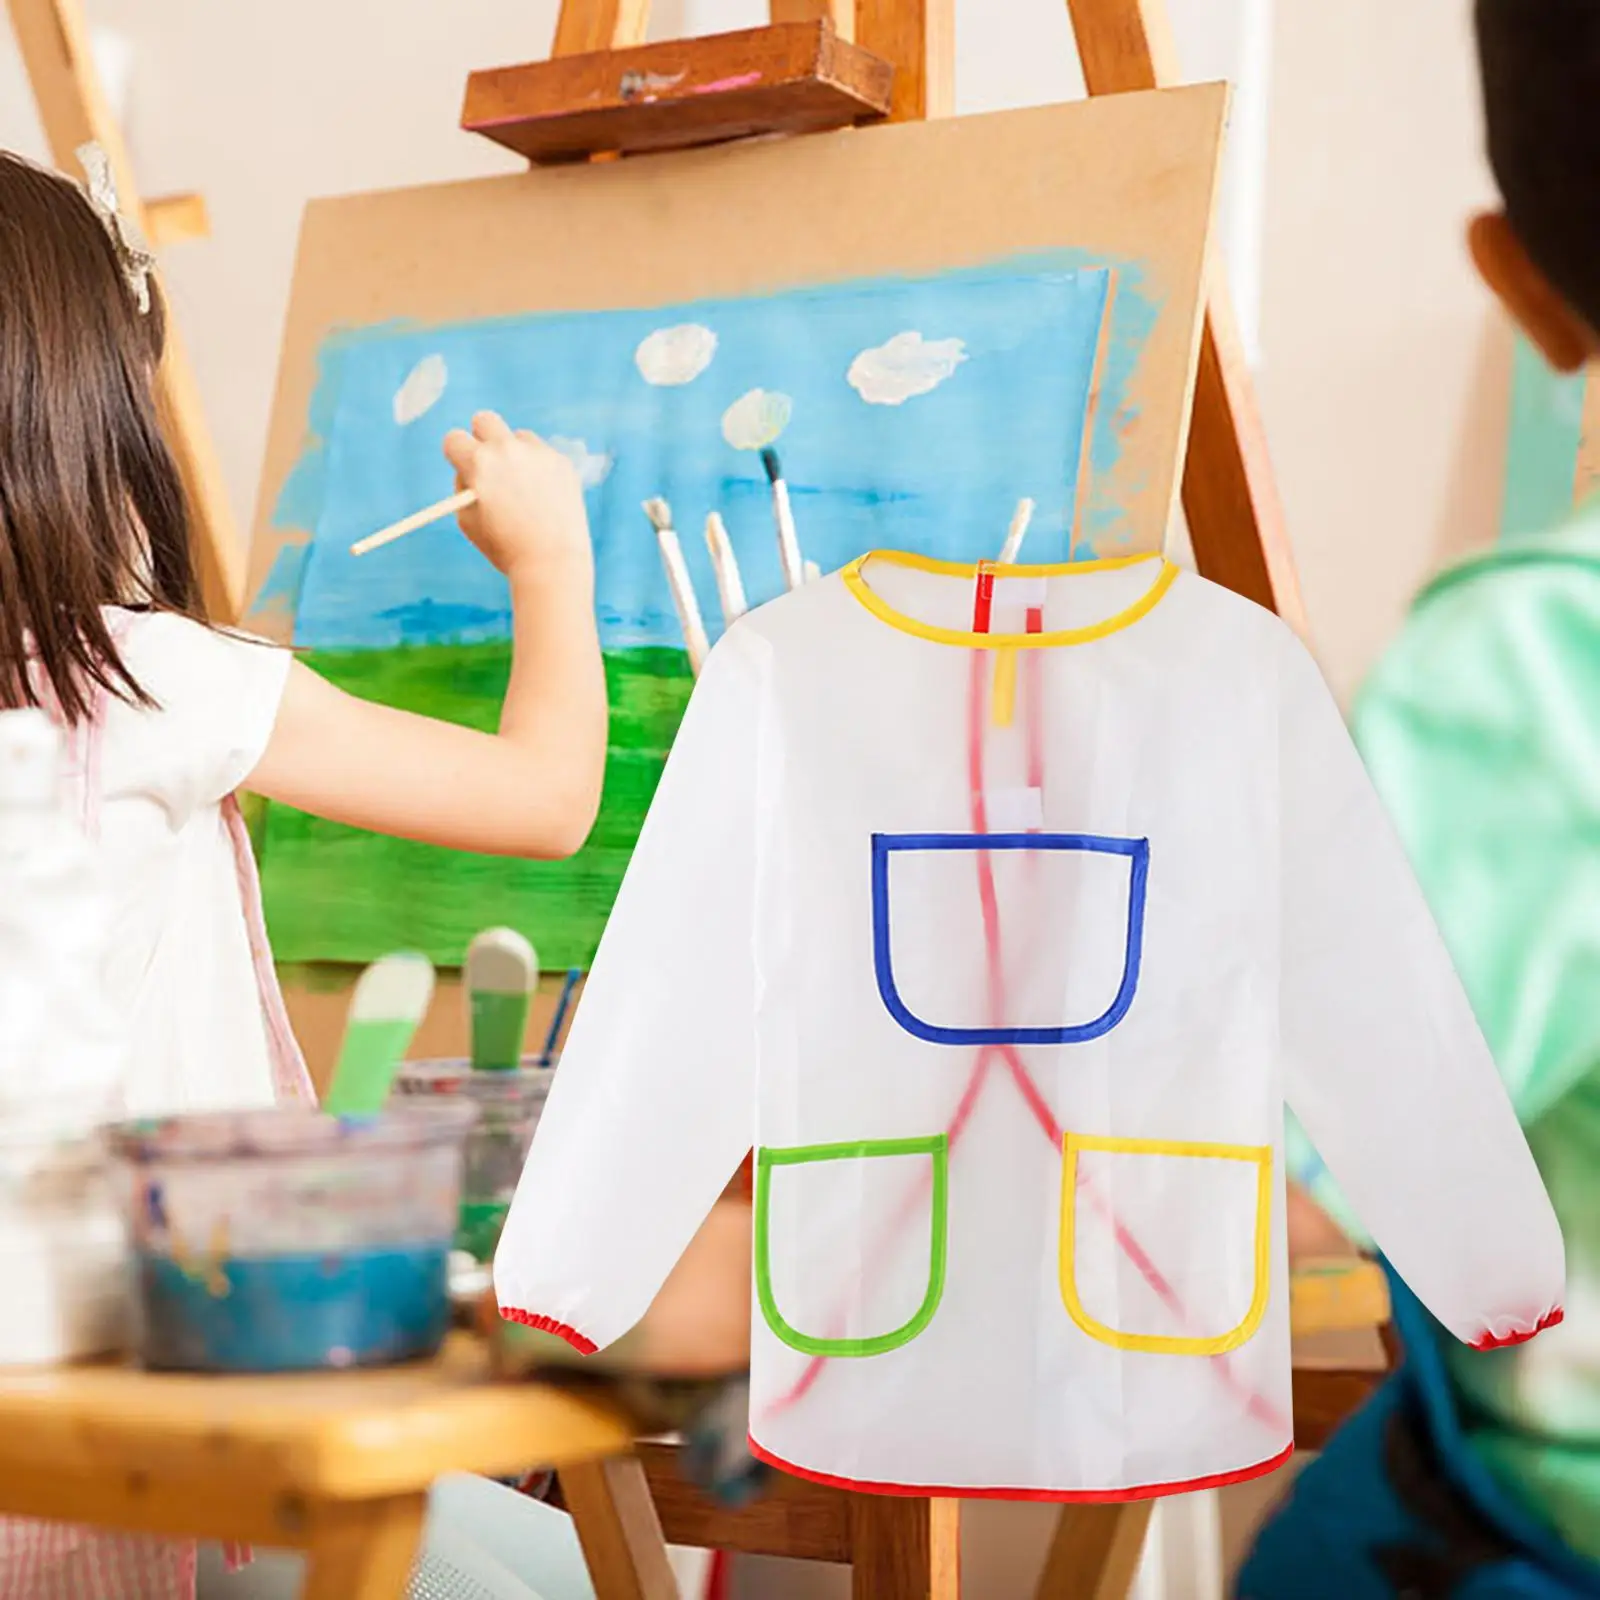 Kids Painting Apron with Three Pockets Gadgets Light and Thin Artist Painting Aprons Kids Bibs for Feeding Baking Kindergarten